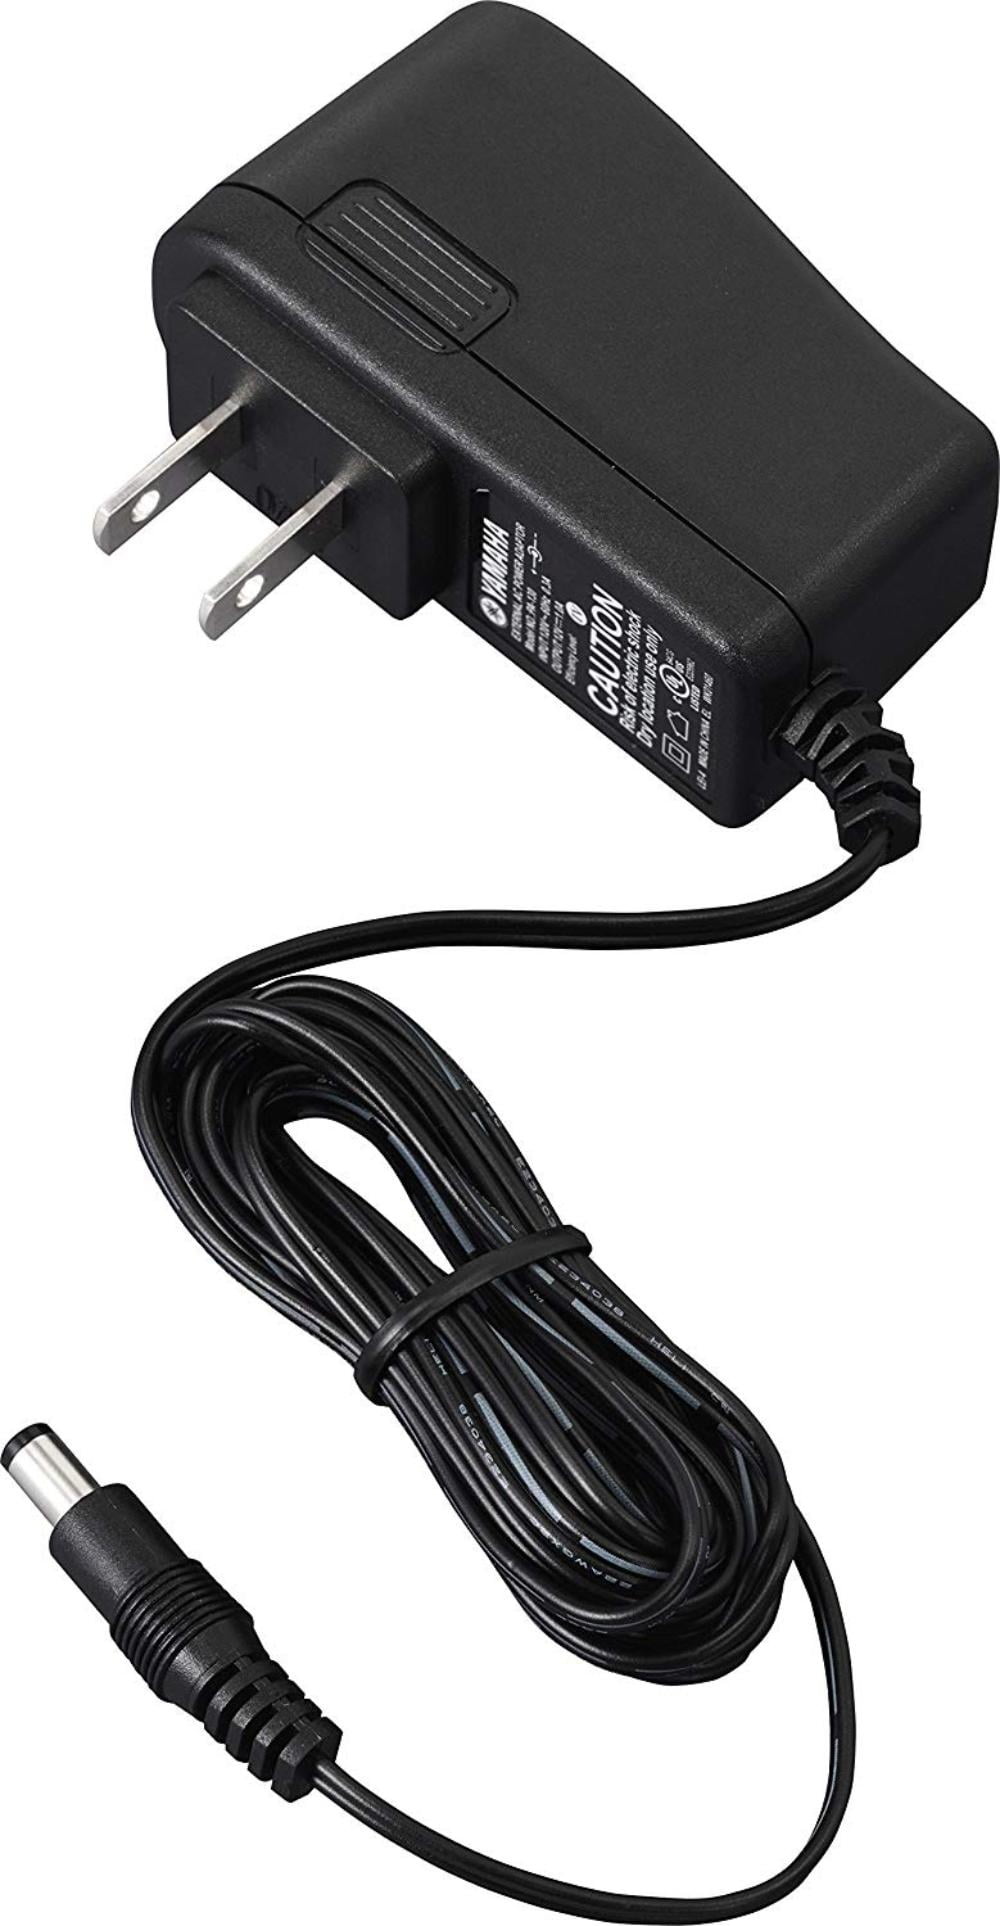 Free Sh Cooper-Atkins 9374 AC Adapter for TFS4 Multi-Station Digital Timer New